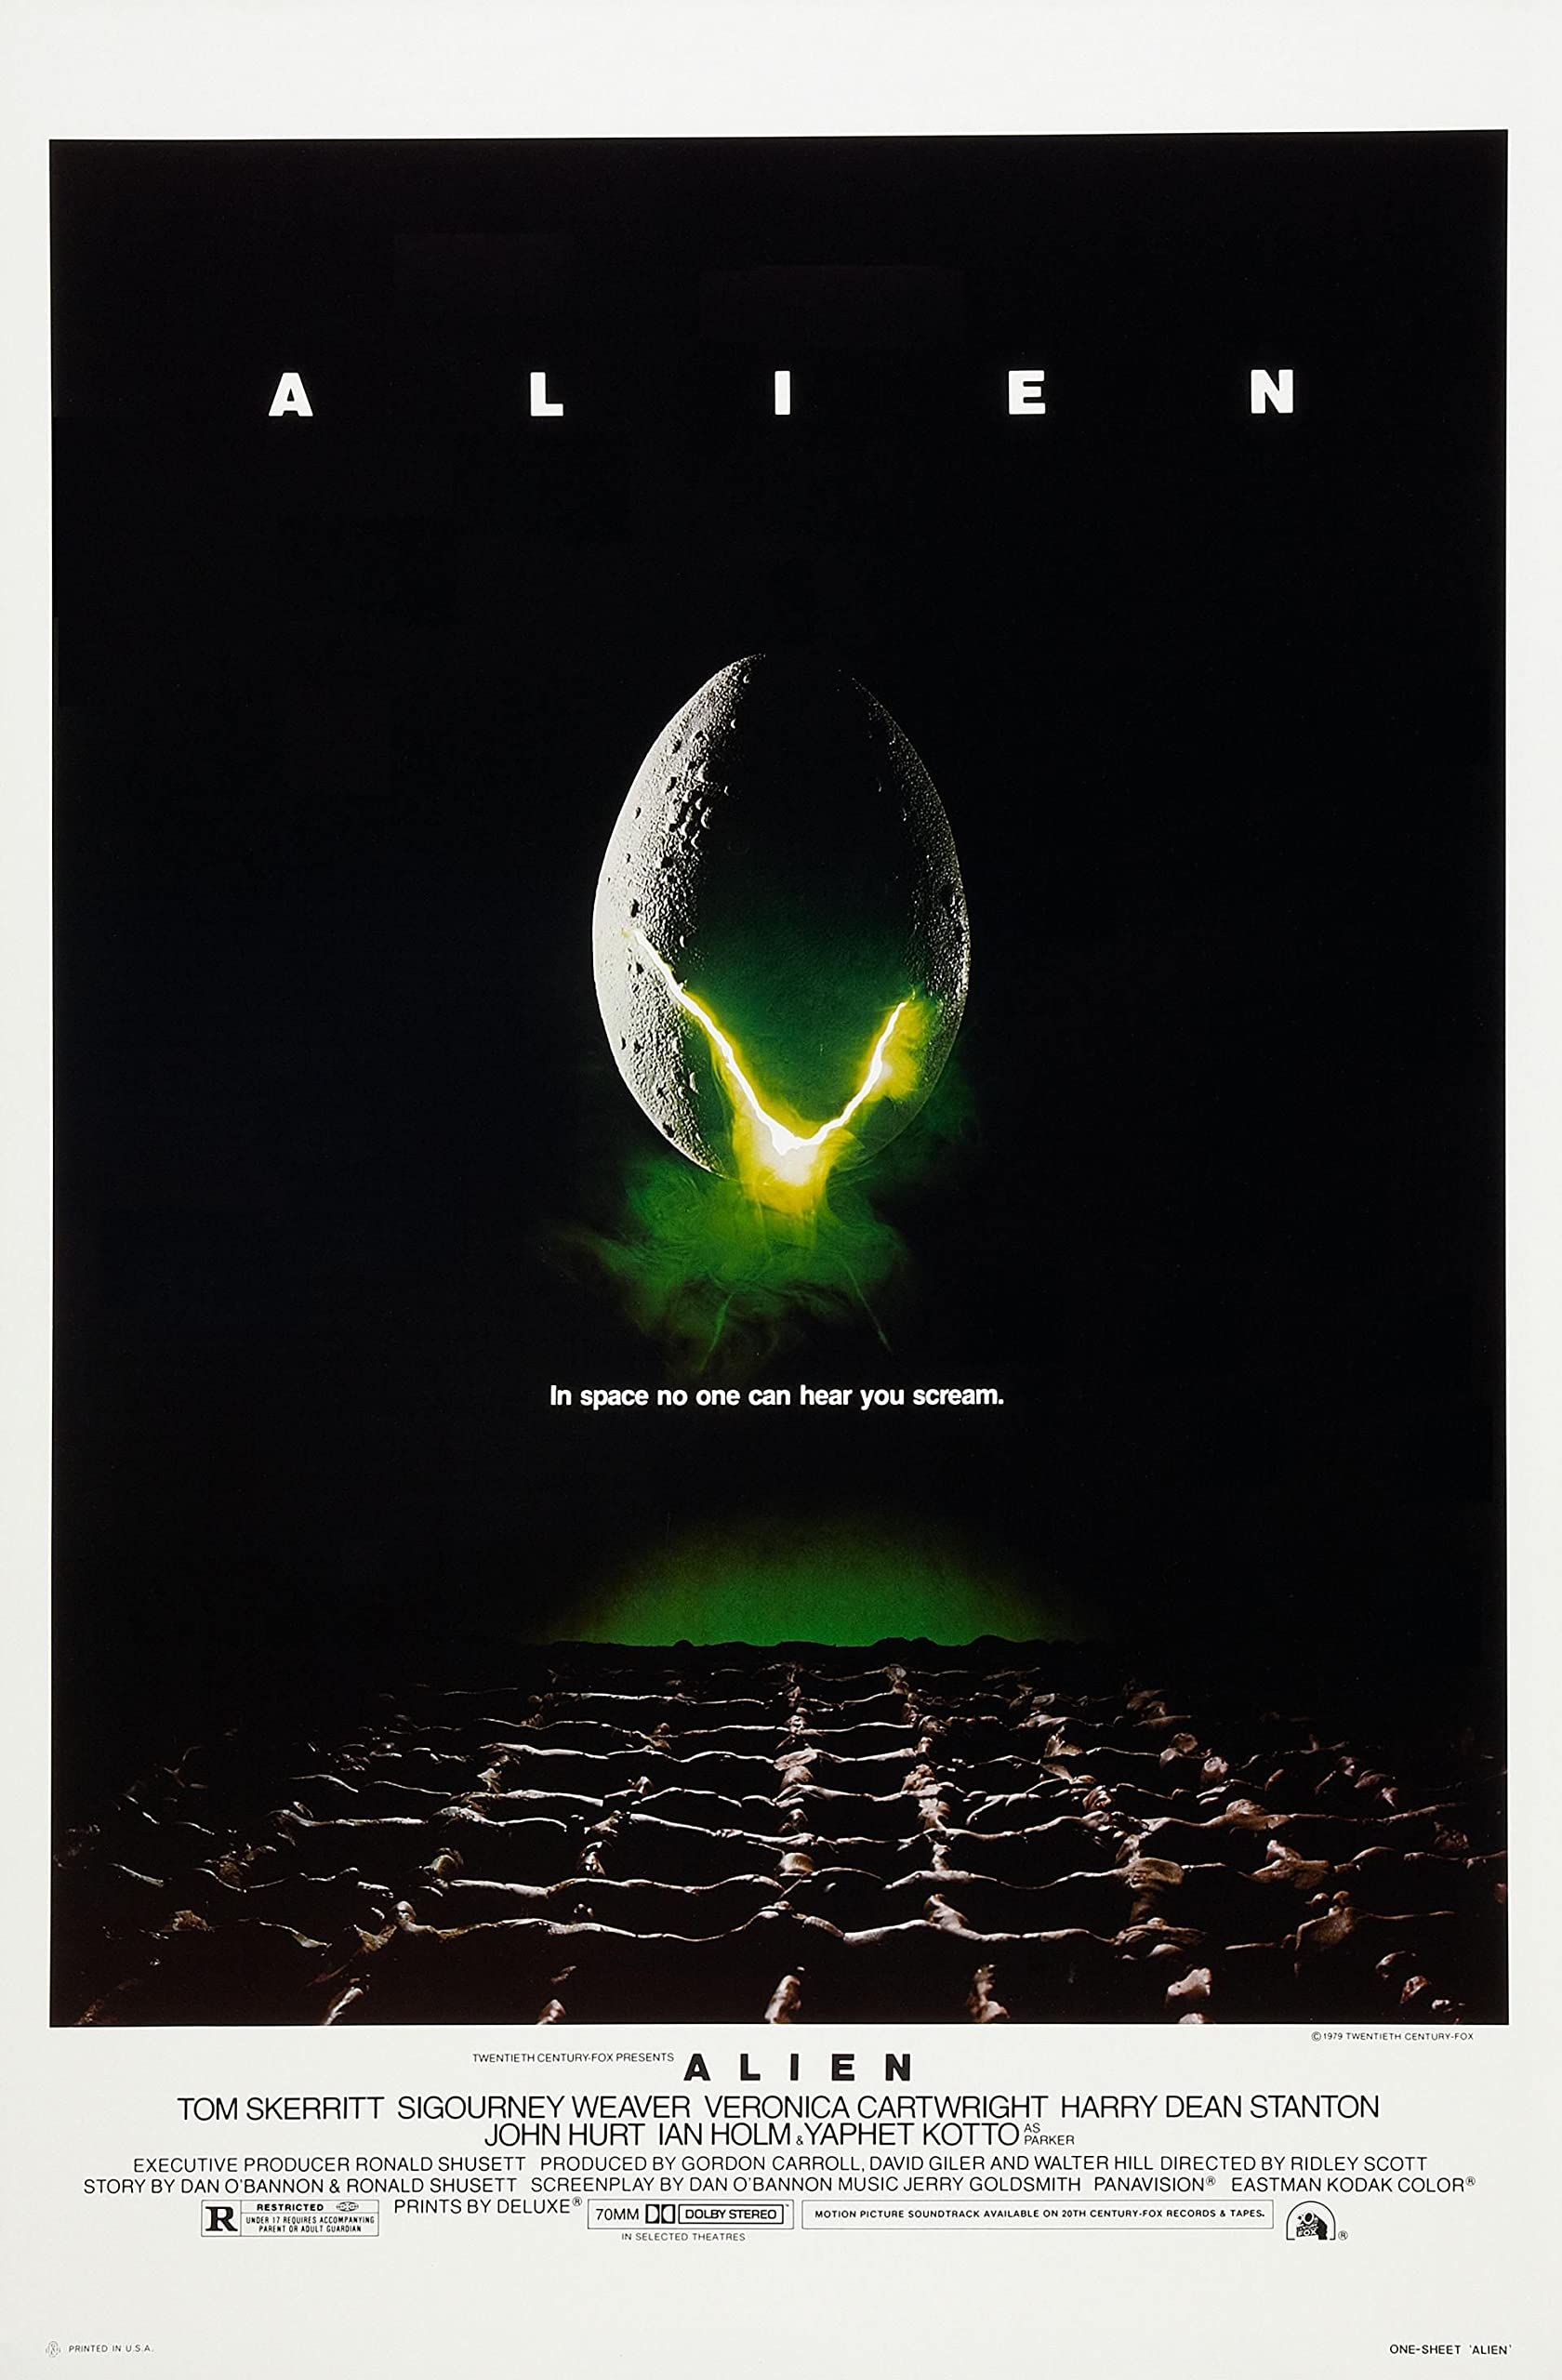 Alien: The Classic Sci-Fi/Horror Film with a Strong Feminist Message